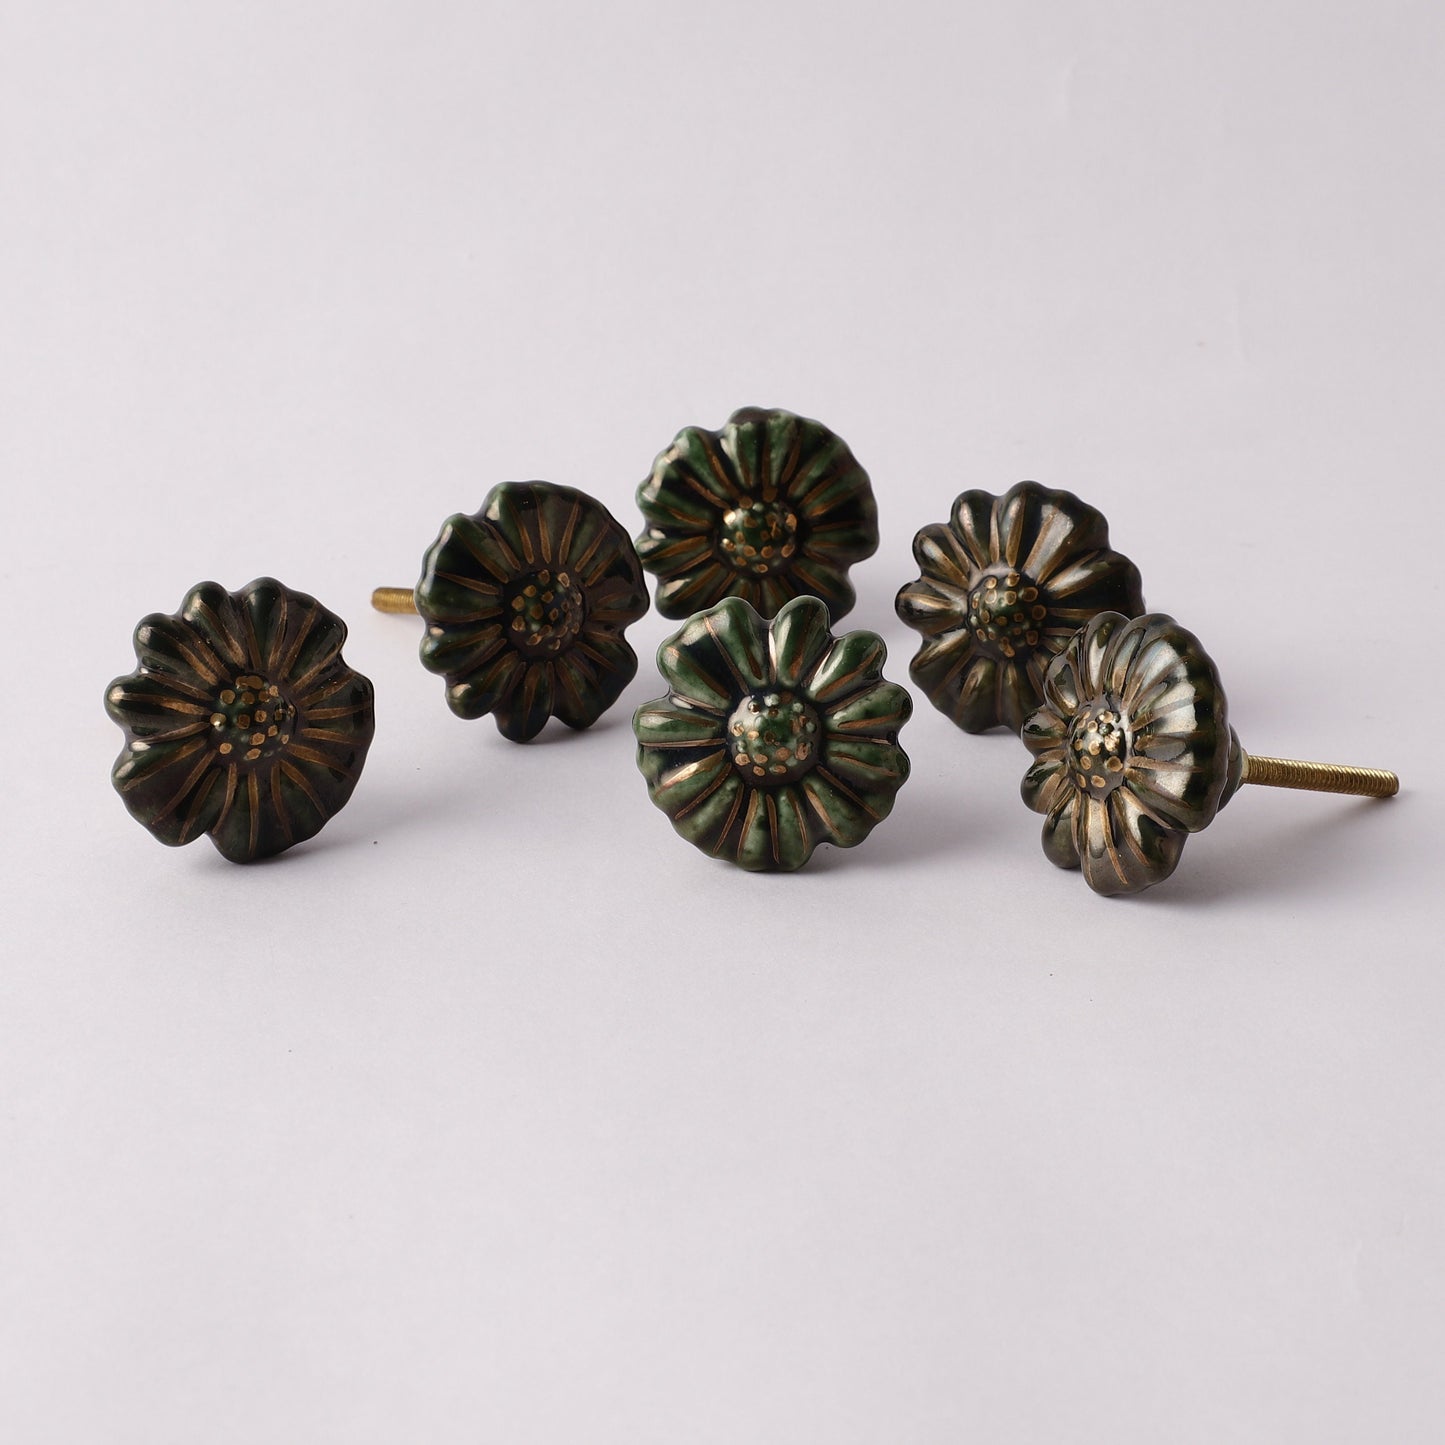 Bronzed With an Aged Green Floral Ceramic Pull Knobs (C4)